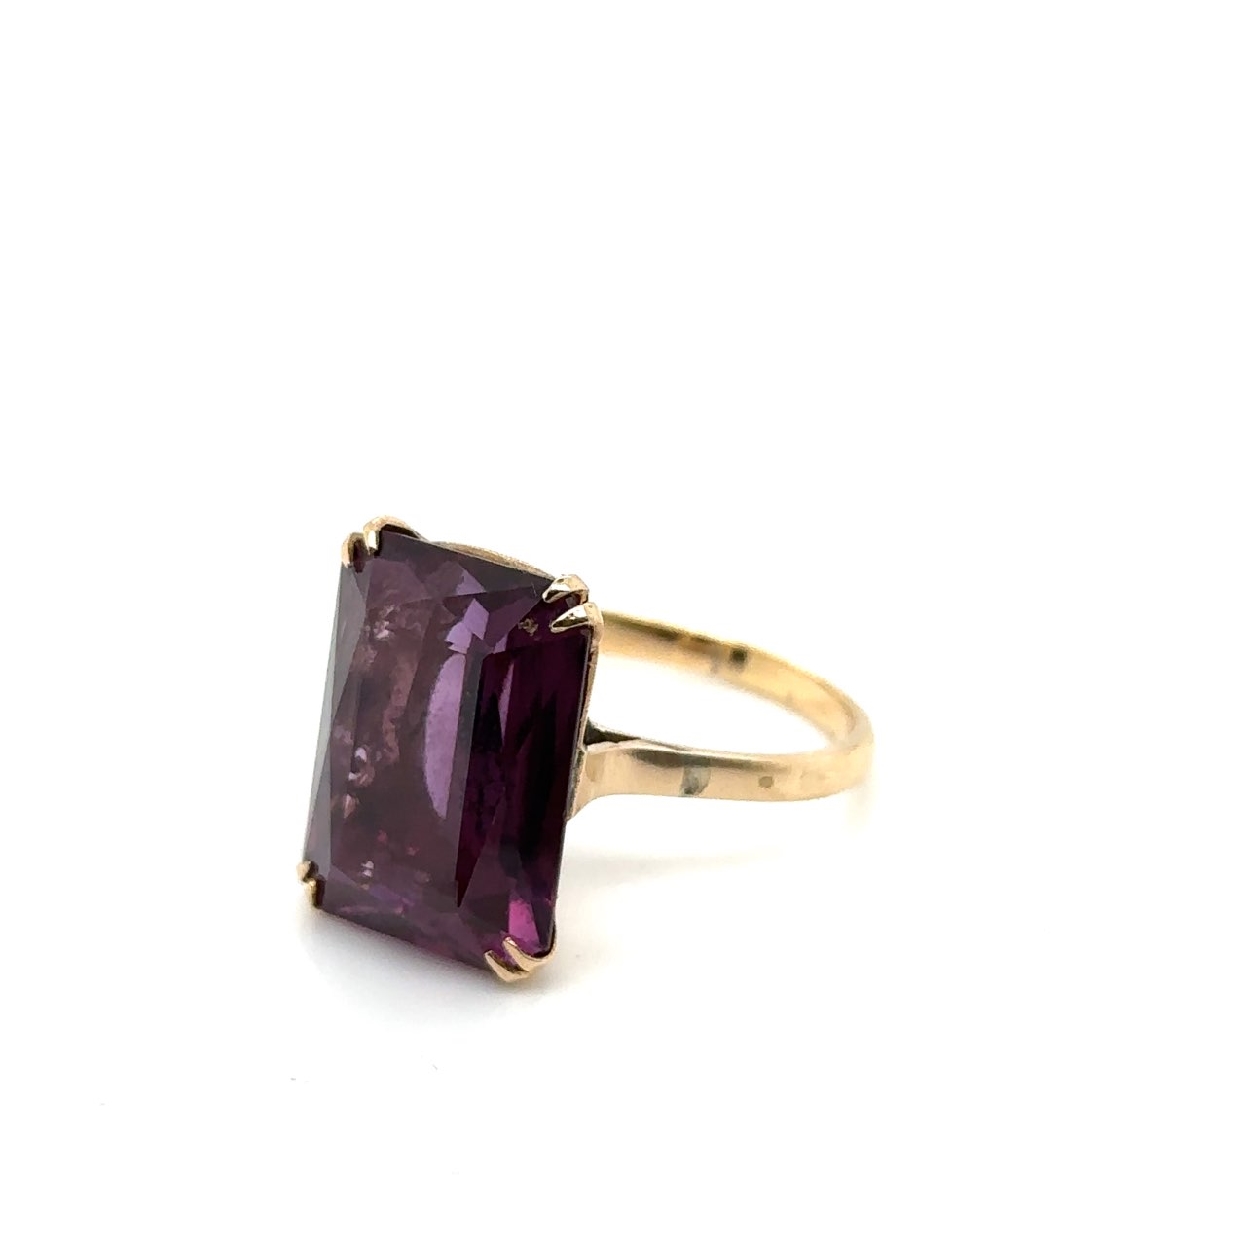 14K Yellow Gold Emerald Cut Synthetic Sapphire Ring Size 8.25